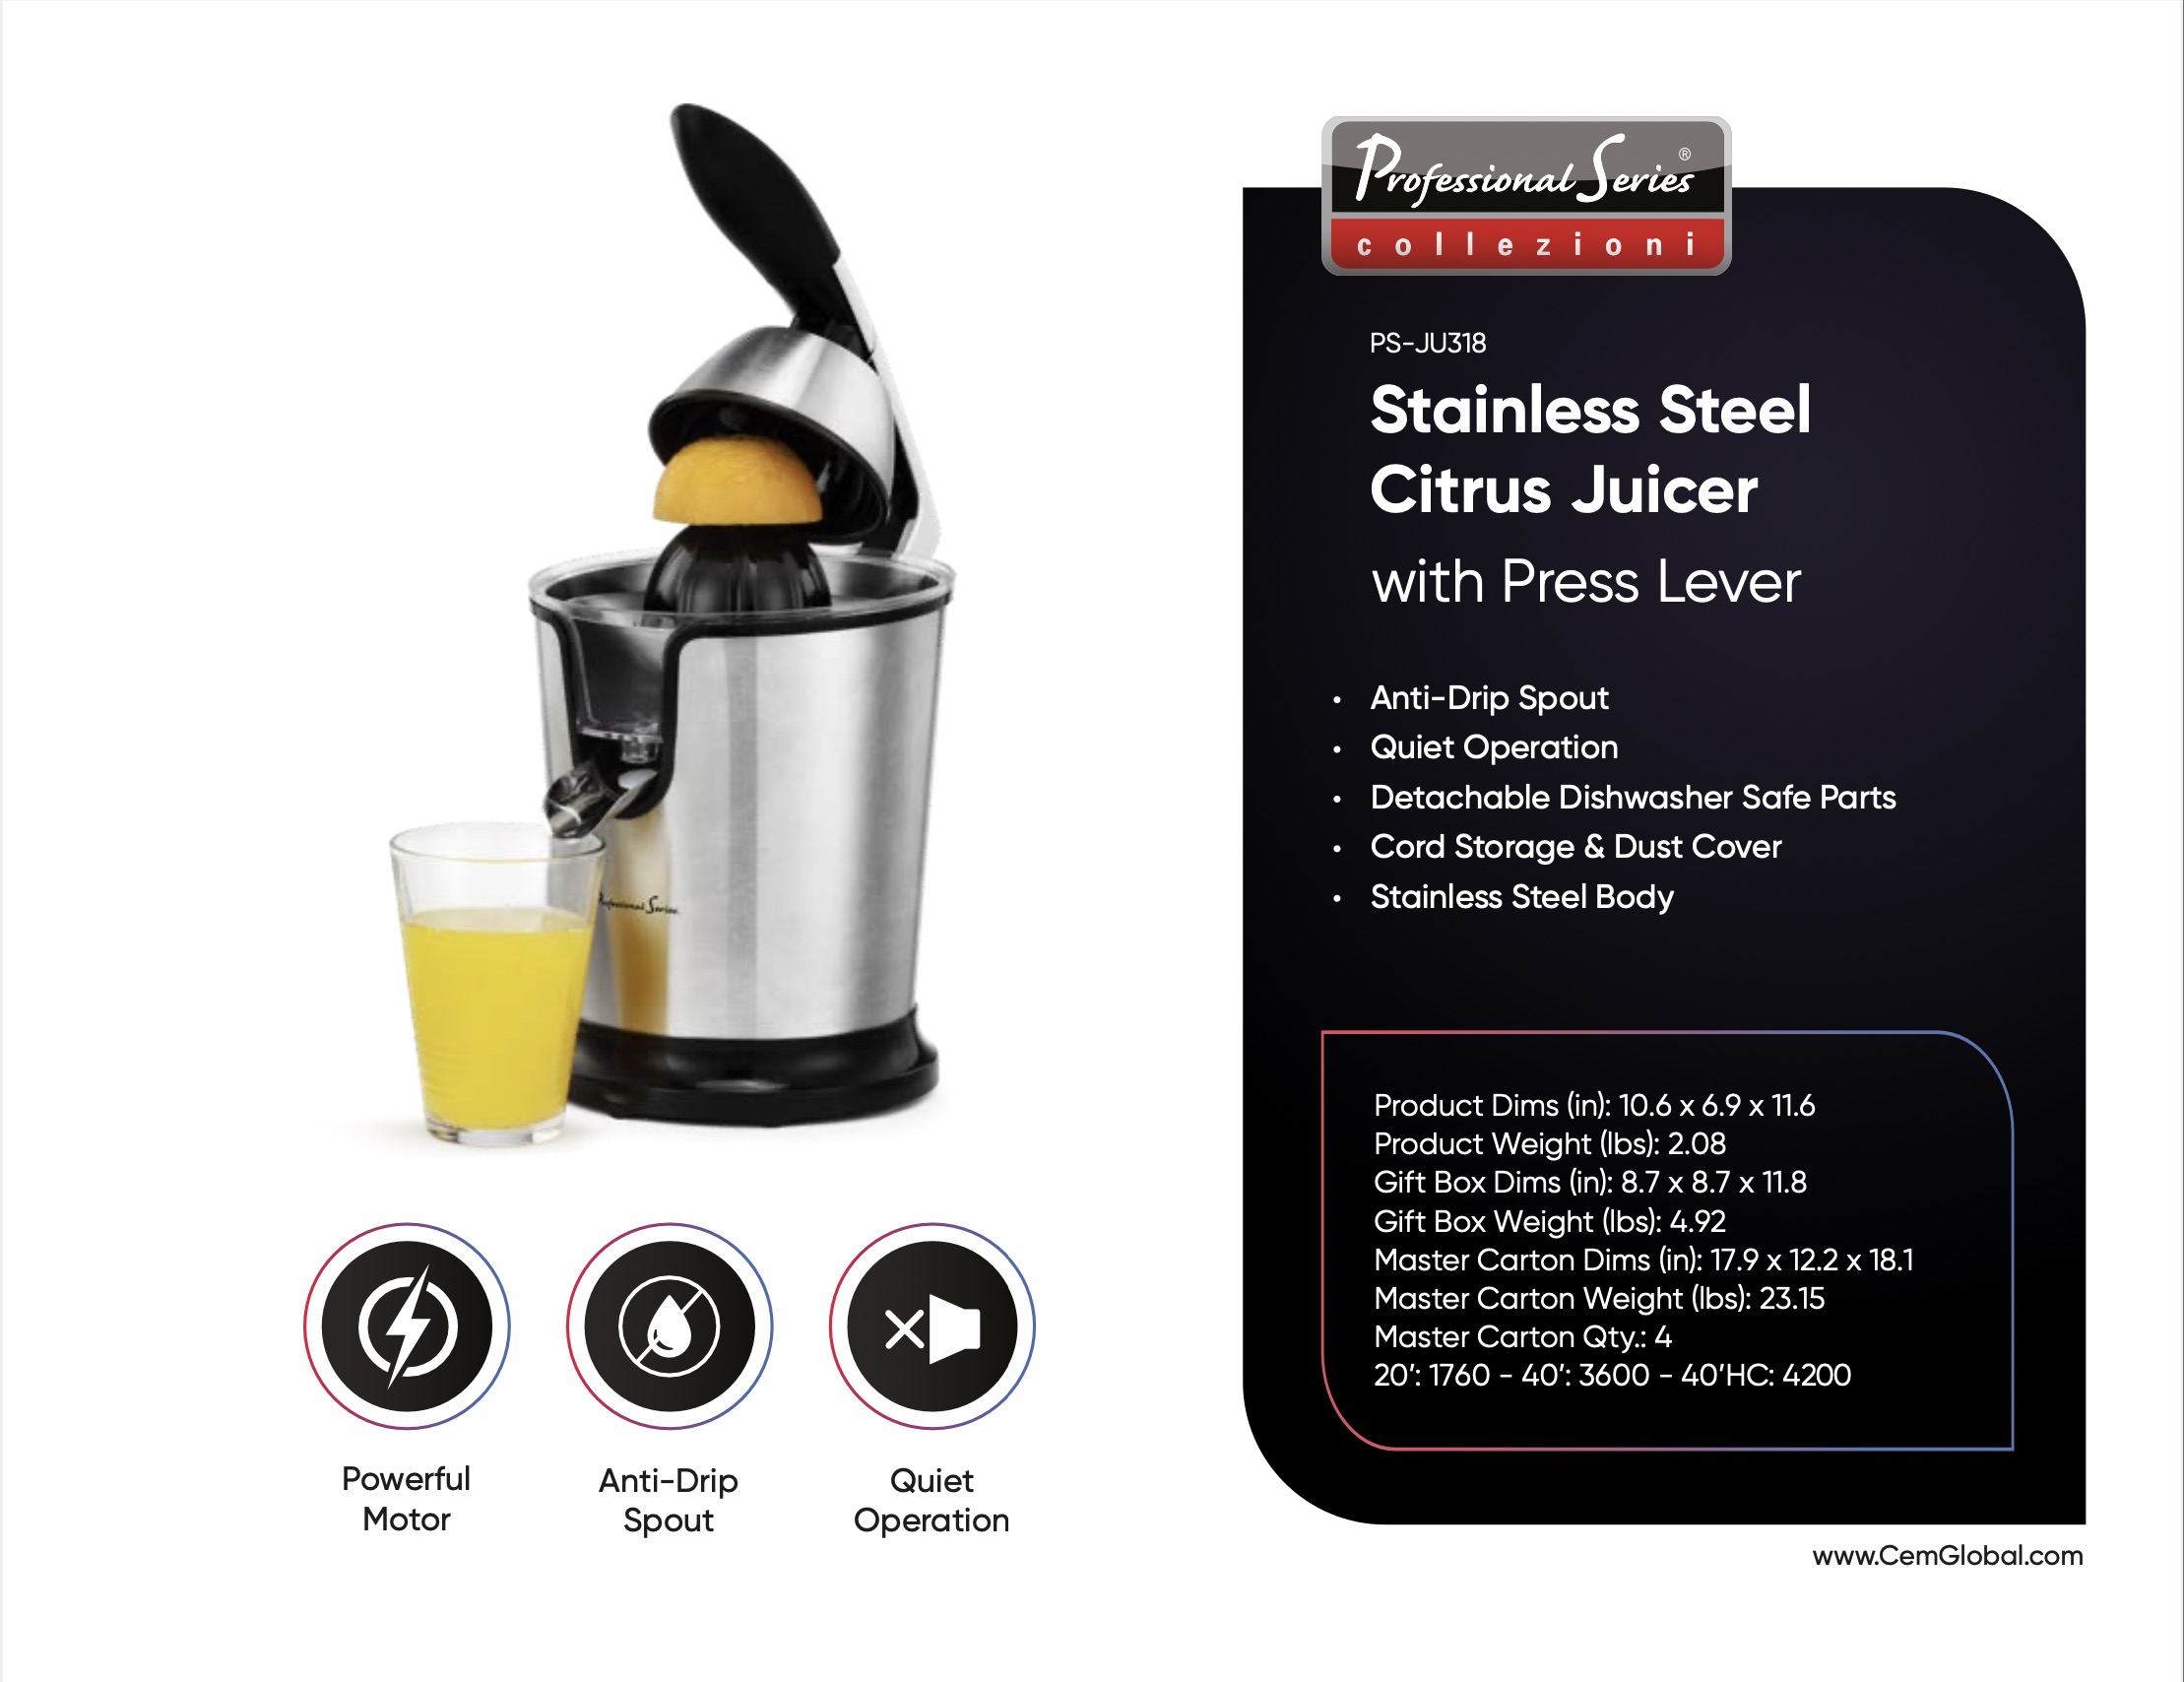 Stainless Steel Citrus Juicer With Press Lever